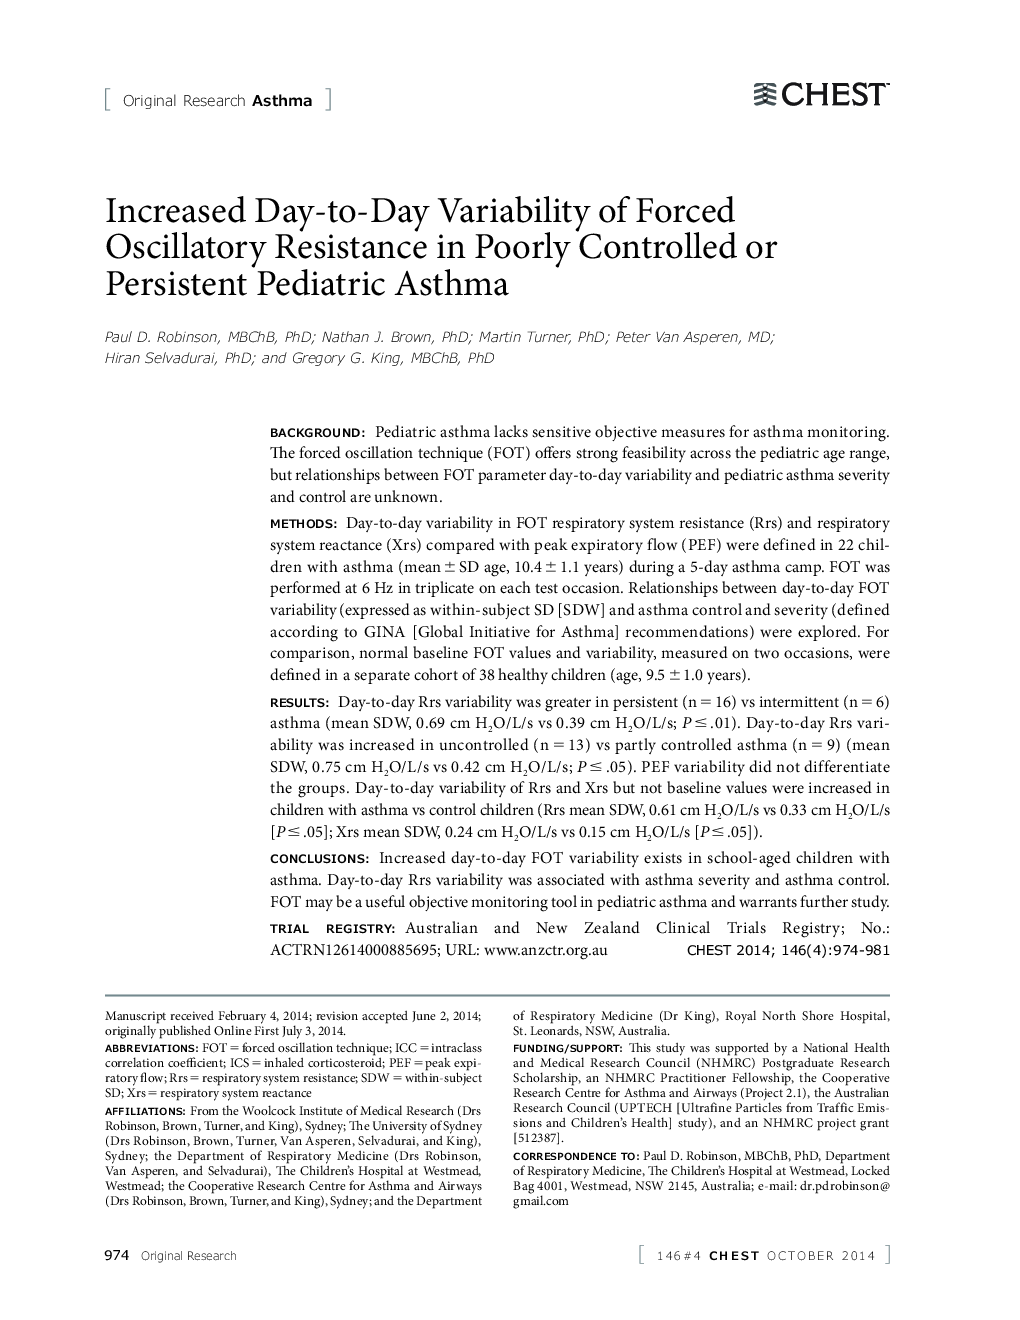 Increased Day-to-Day Variability of Forced Oscillatory Resistance in Poorly Controlled or Persistent Pediatric Asthma